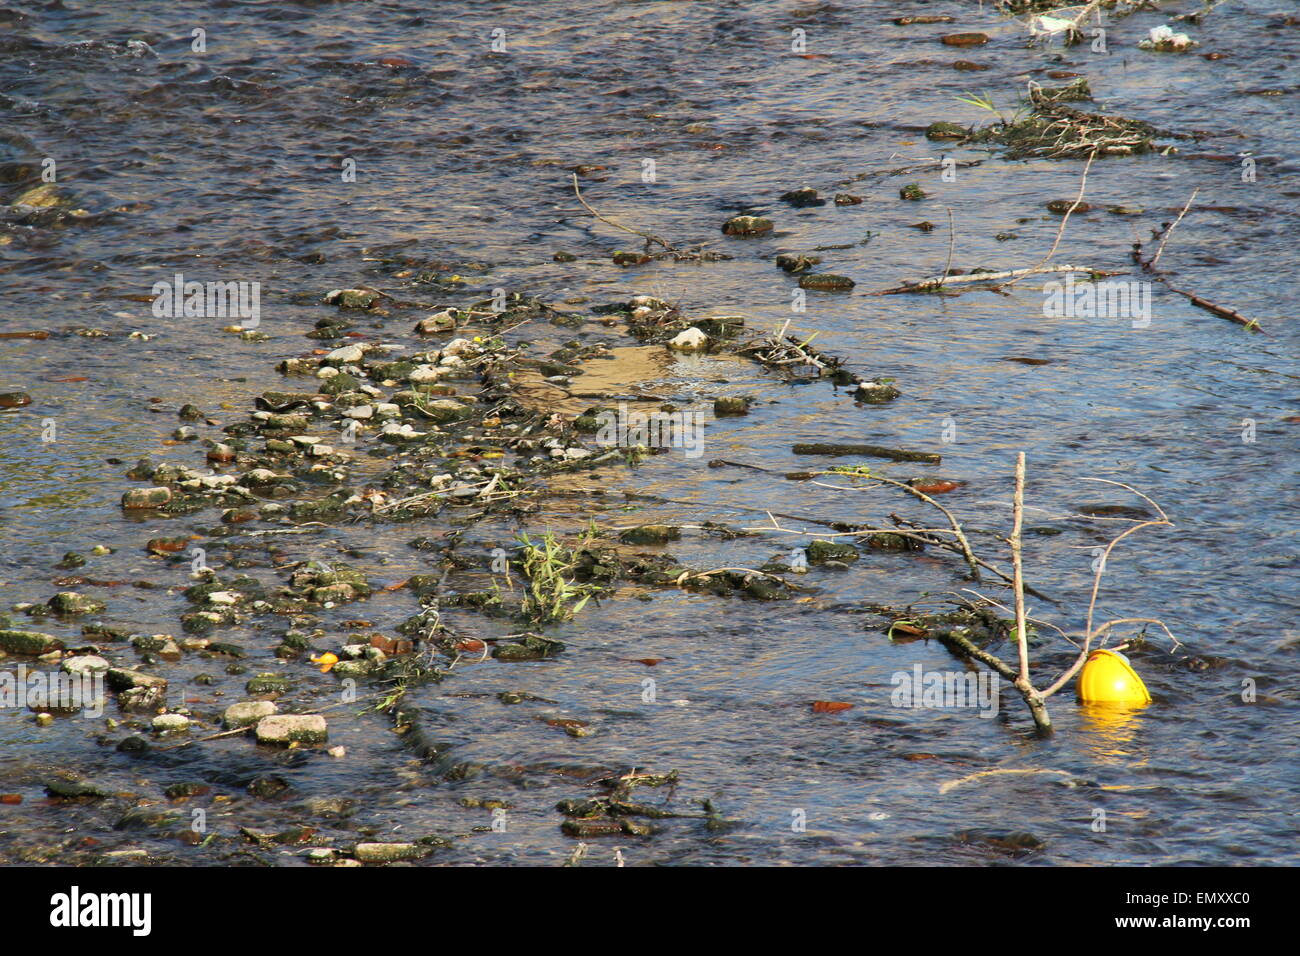 Dirty river pollution protective helmet for worker with  toxic waste. Please care for the environment. Stock Photo